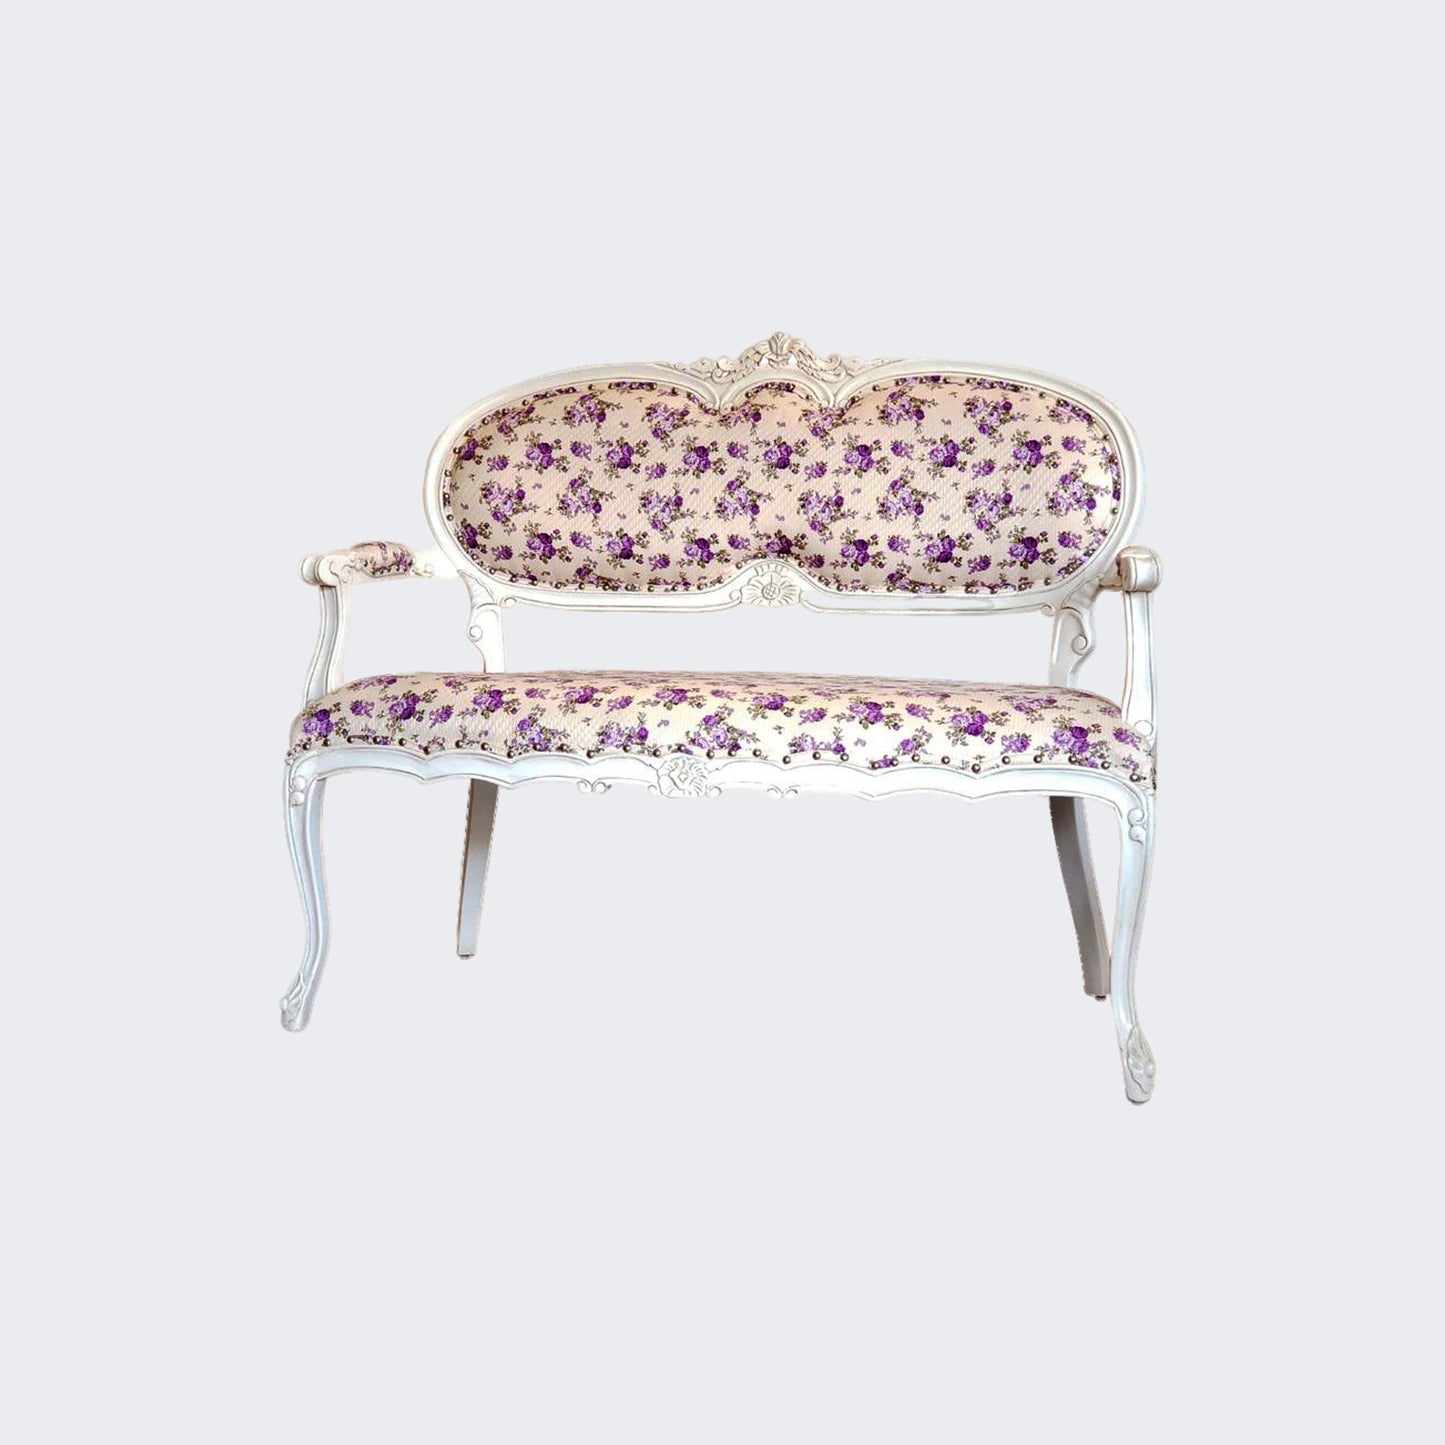 White Cedar Two Seater Sofa With Purple Floral Pattern On Organic Canvas Fabric -SK- SKU 1150